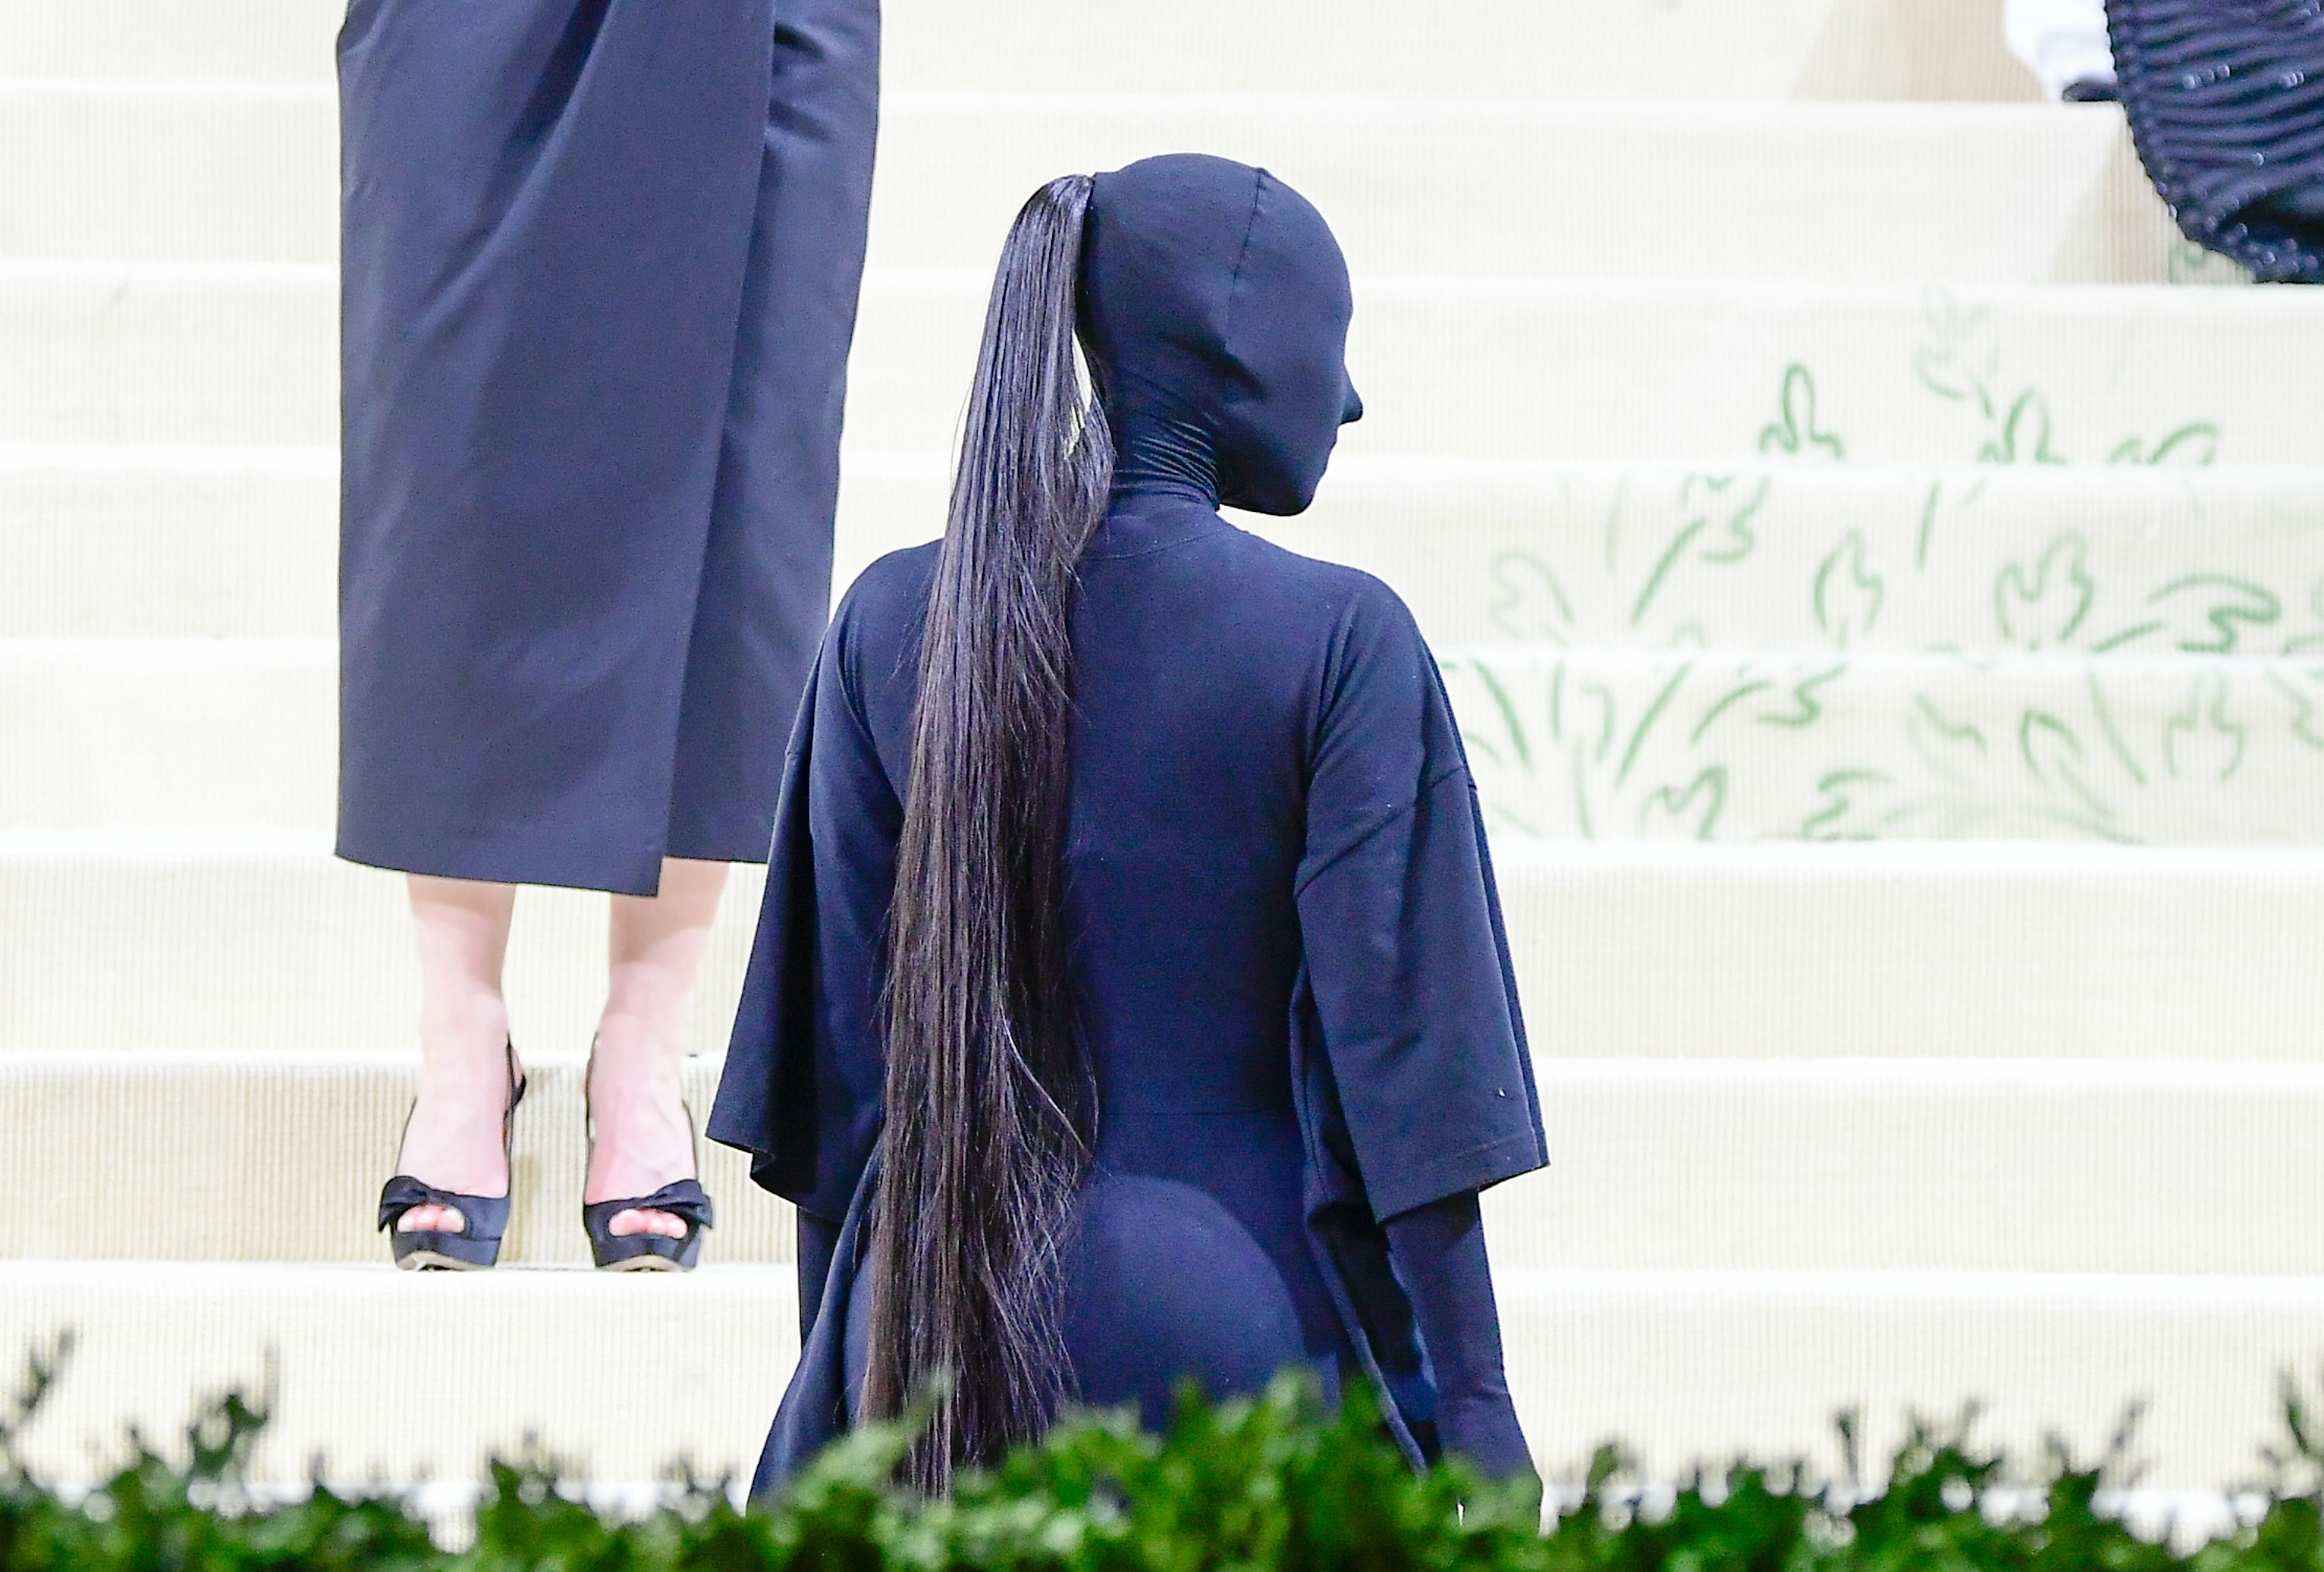 Kim wears the Met Gala bodysuit with her ponytail coming through the stocking